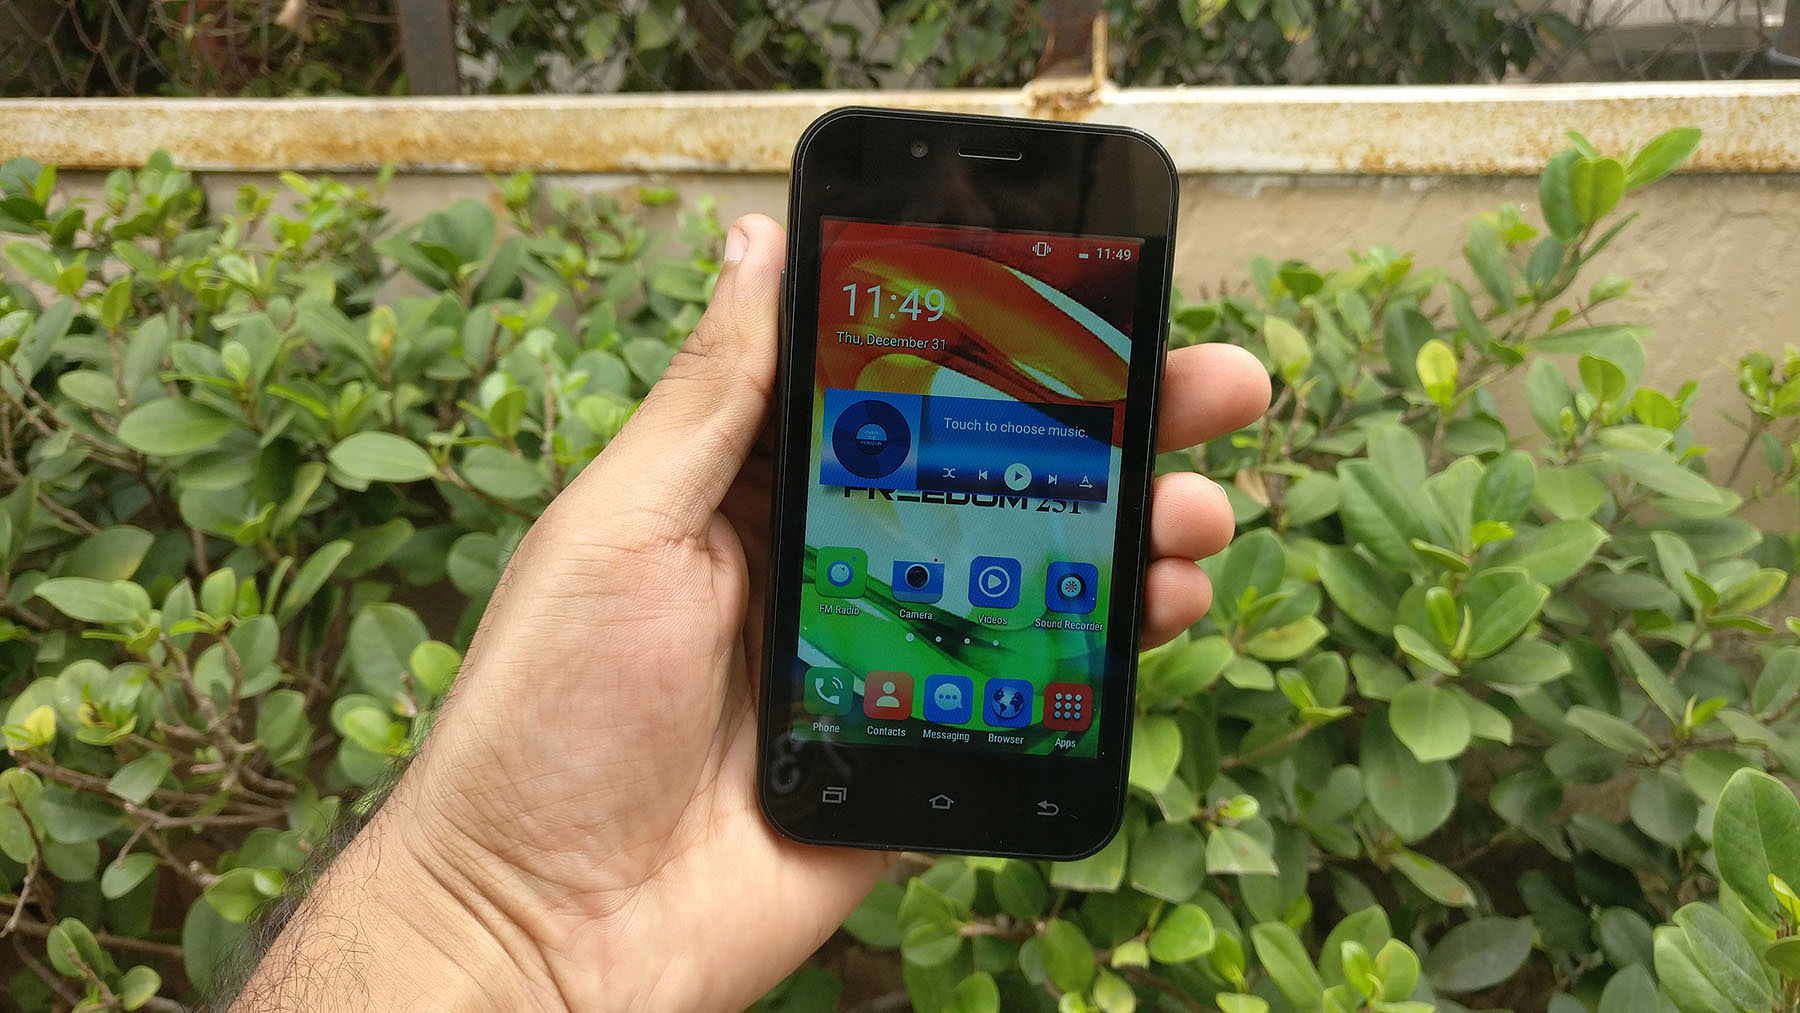 Freedom 251 phone from Ringing Bells. 